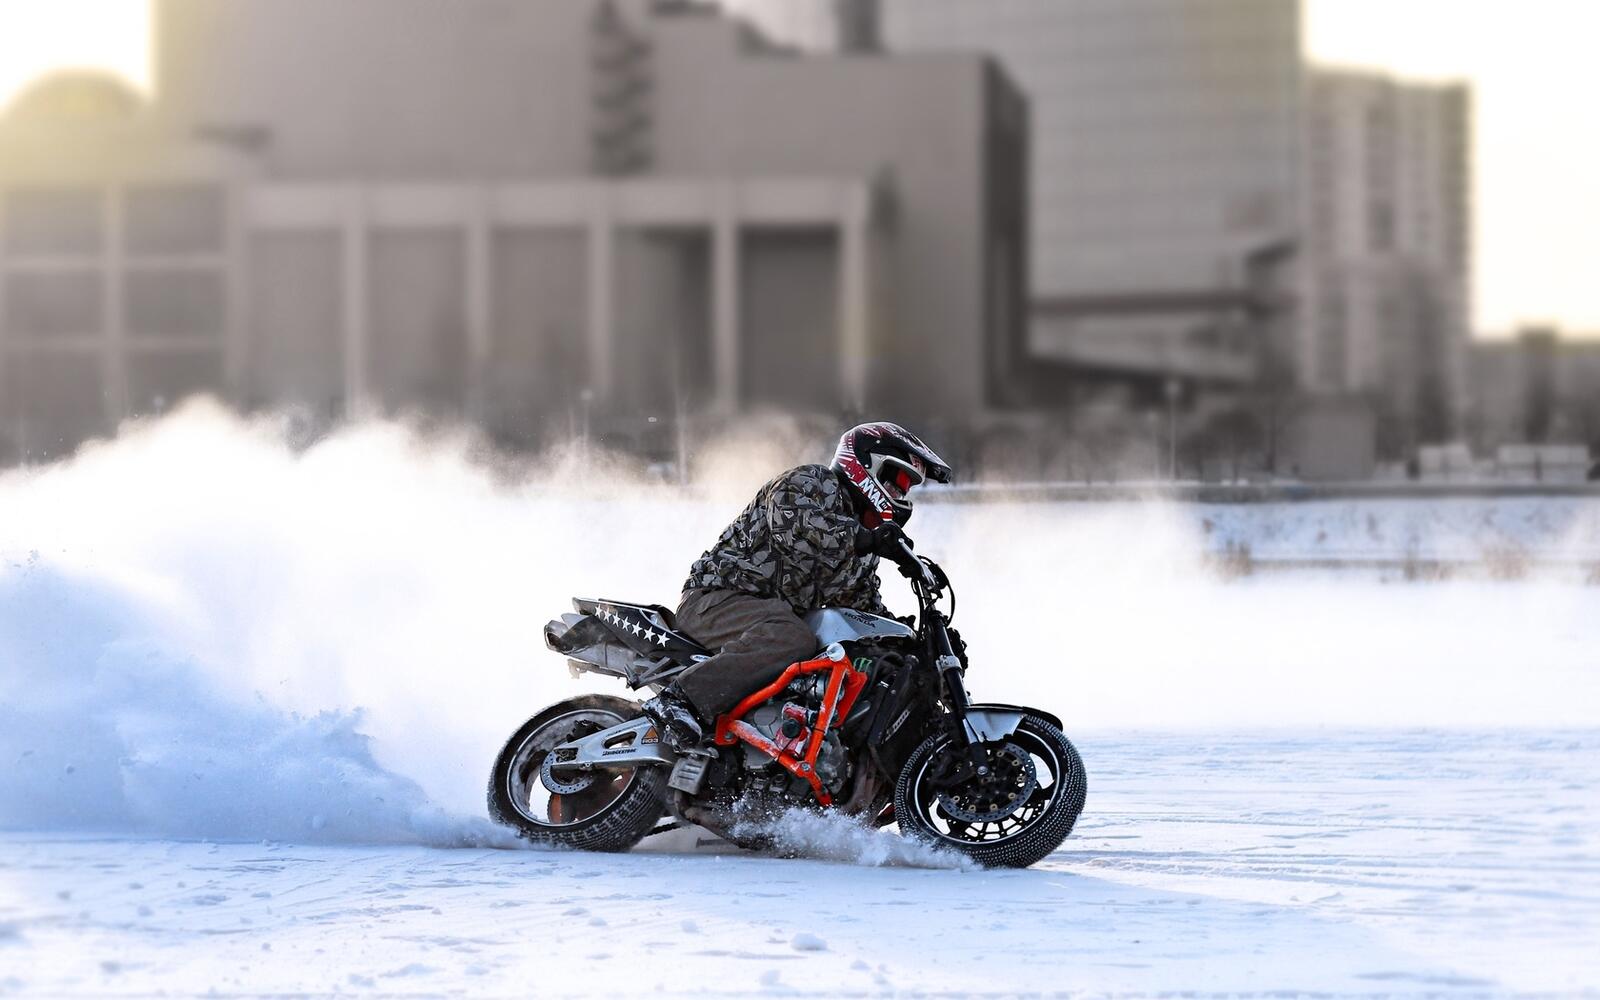 Wallpapers motorcyclist ice snow on the desktop